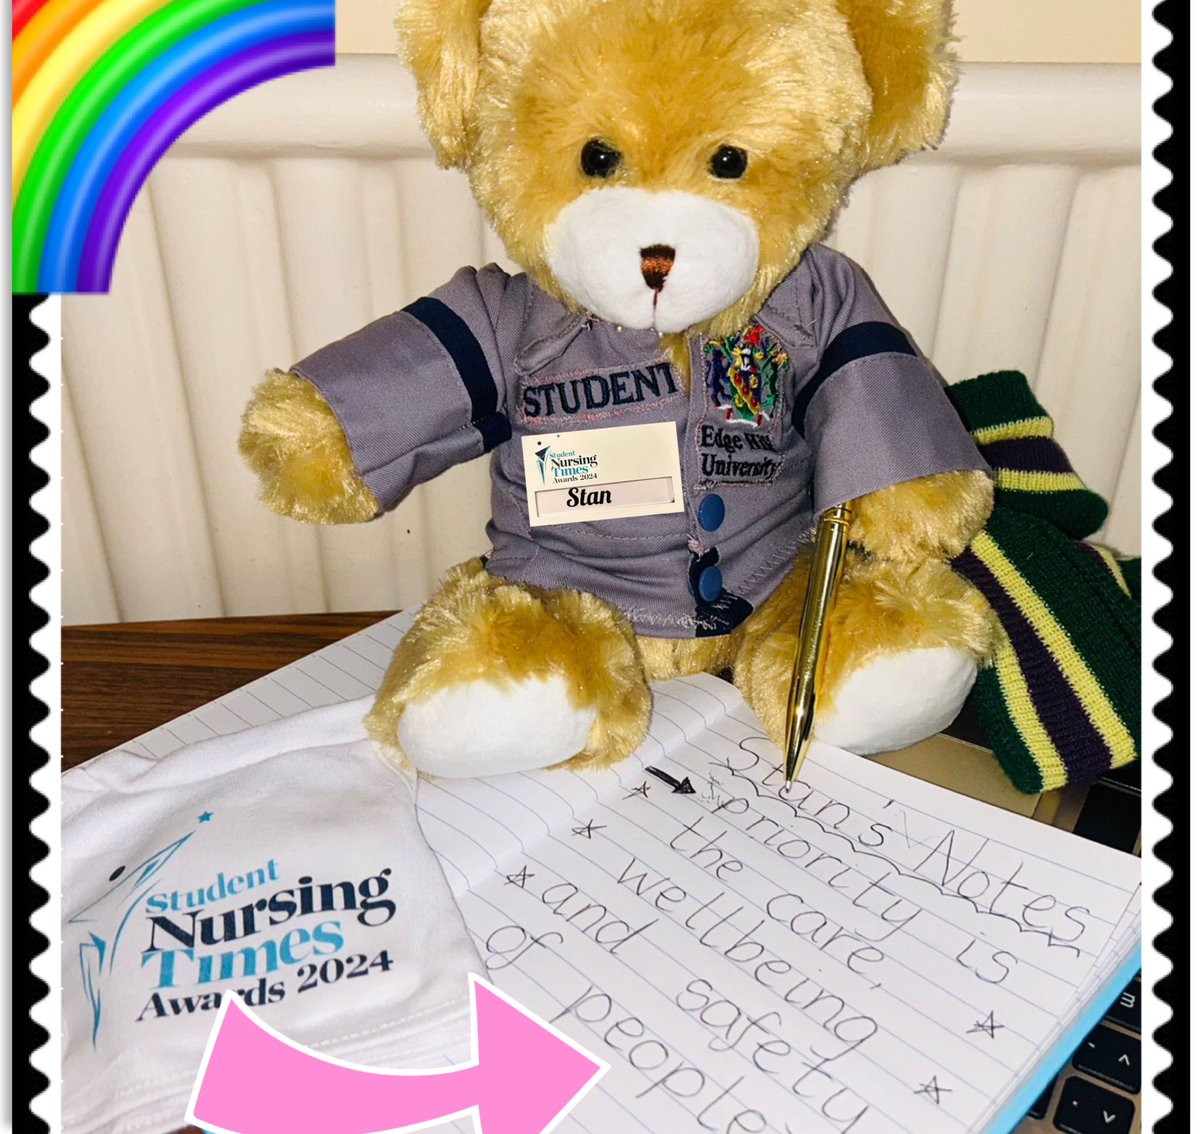 Another busy day for Stan. He learnt about how nurses must promote a culture of equality and inclusion where everyone is appreciated and treated with respect @NursingTimes #SNTABear